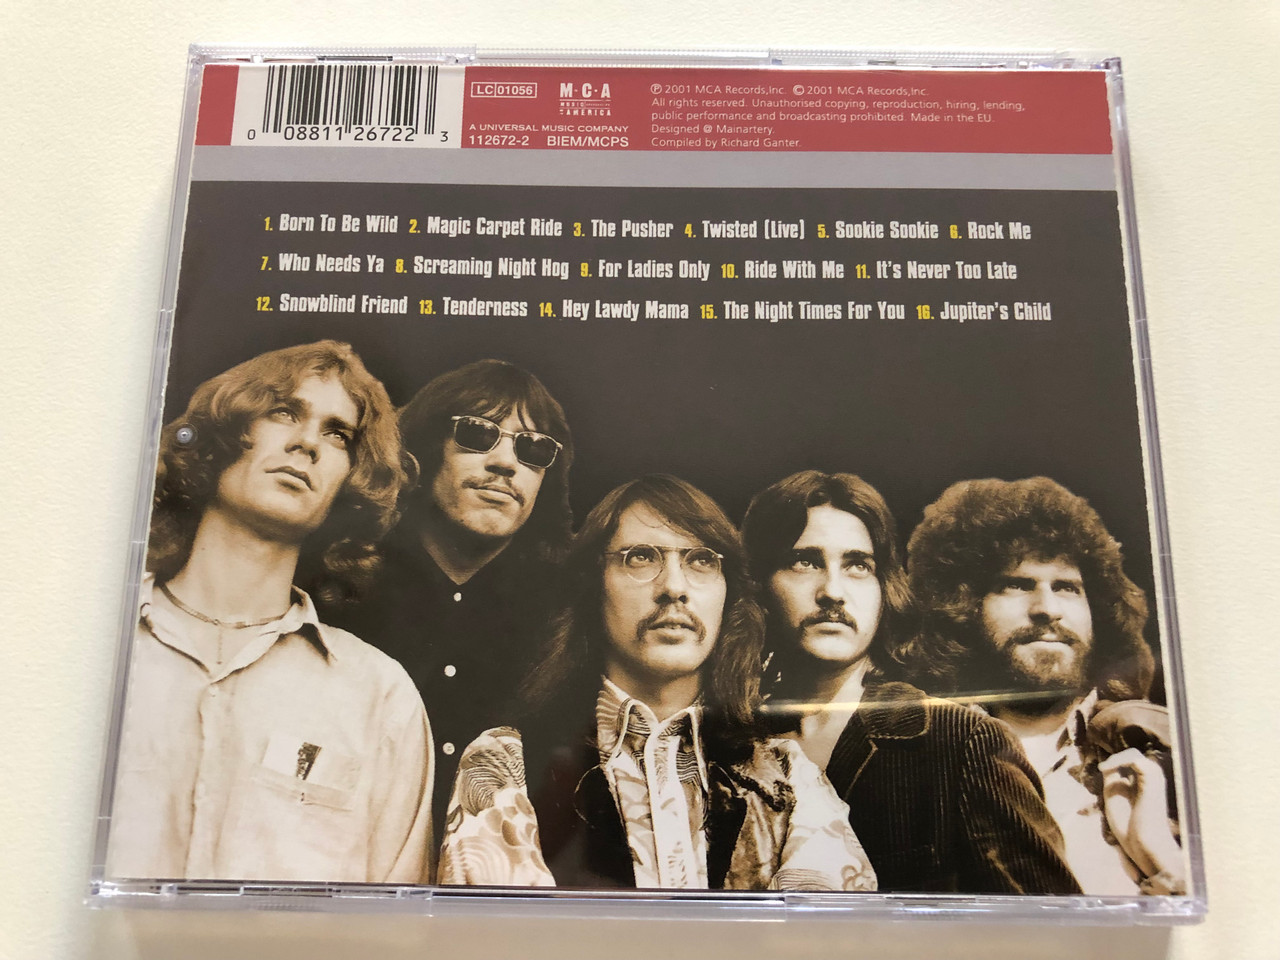 https://cdn10.bigcommerce.com/s-62bdpkt7pb/products/31169/images/183493/Classic_Steppenwolf_The_Universal_Masters_Collection_MCA_Records_Audio_CD_2001_112672-2_4__85201.1625591150.1280.1280.JPG?c=2